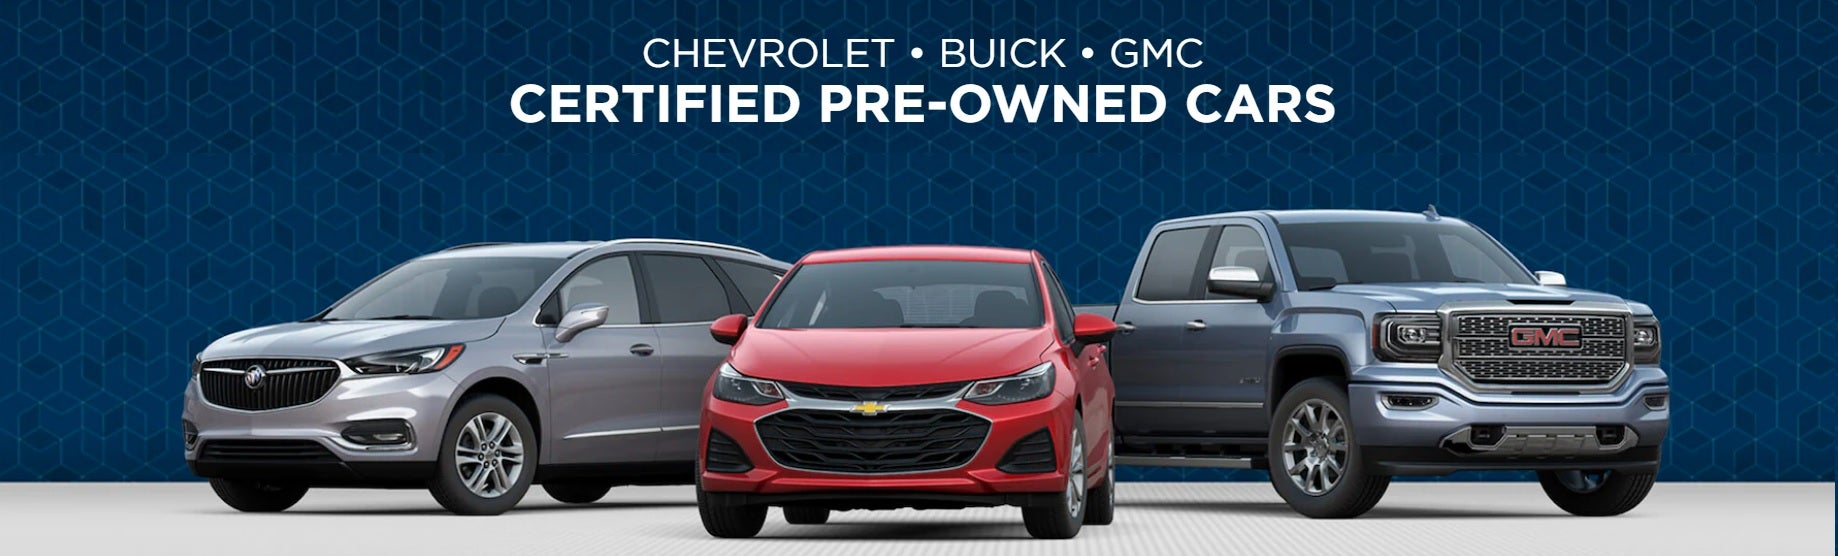 GM Certified Pre-Owned